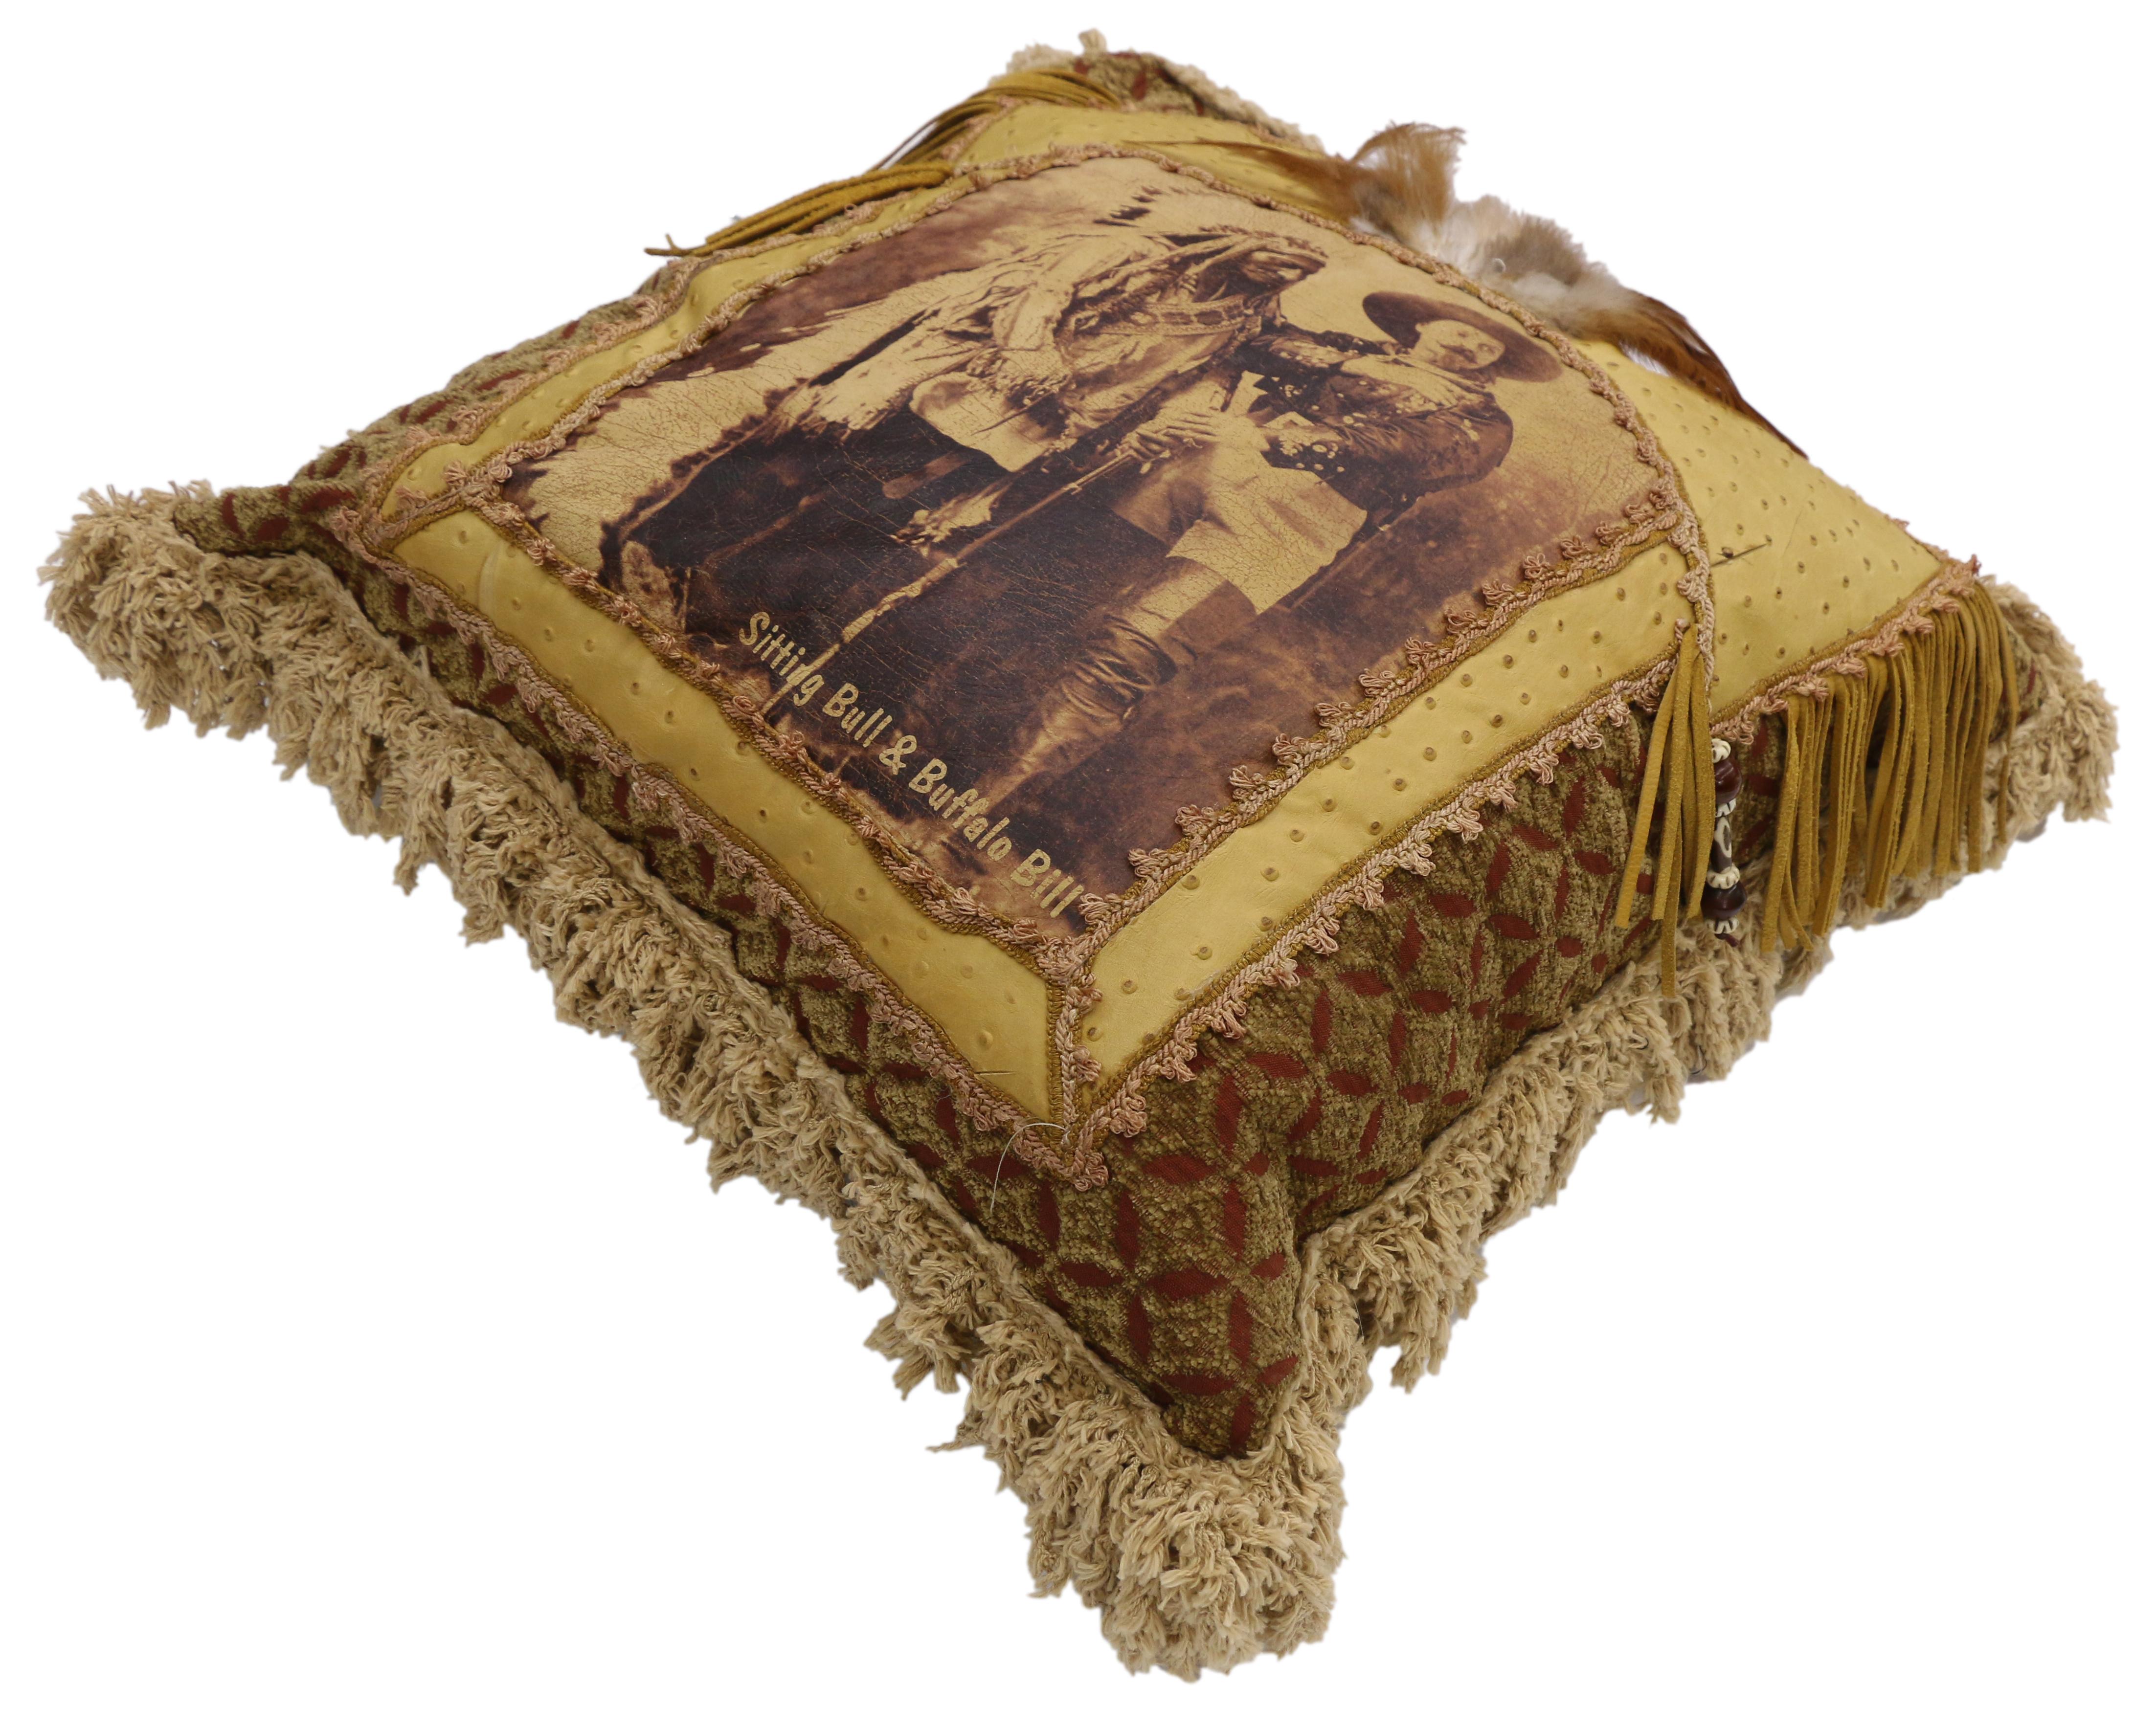 Buffalo bill and sitting bull leather pillow with Anglo-Indian style. This leather throw pillow displays the well-known photograph of sitting bull with buffalo bill taken by William Cross when sitting bull agreed to join buffalo bill's Wild West